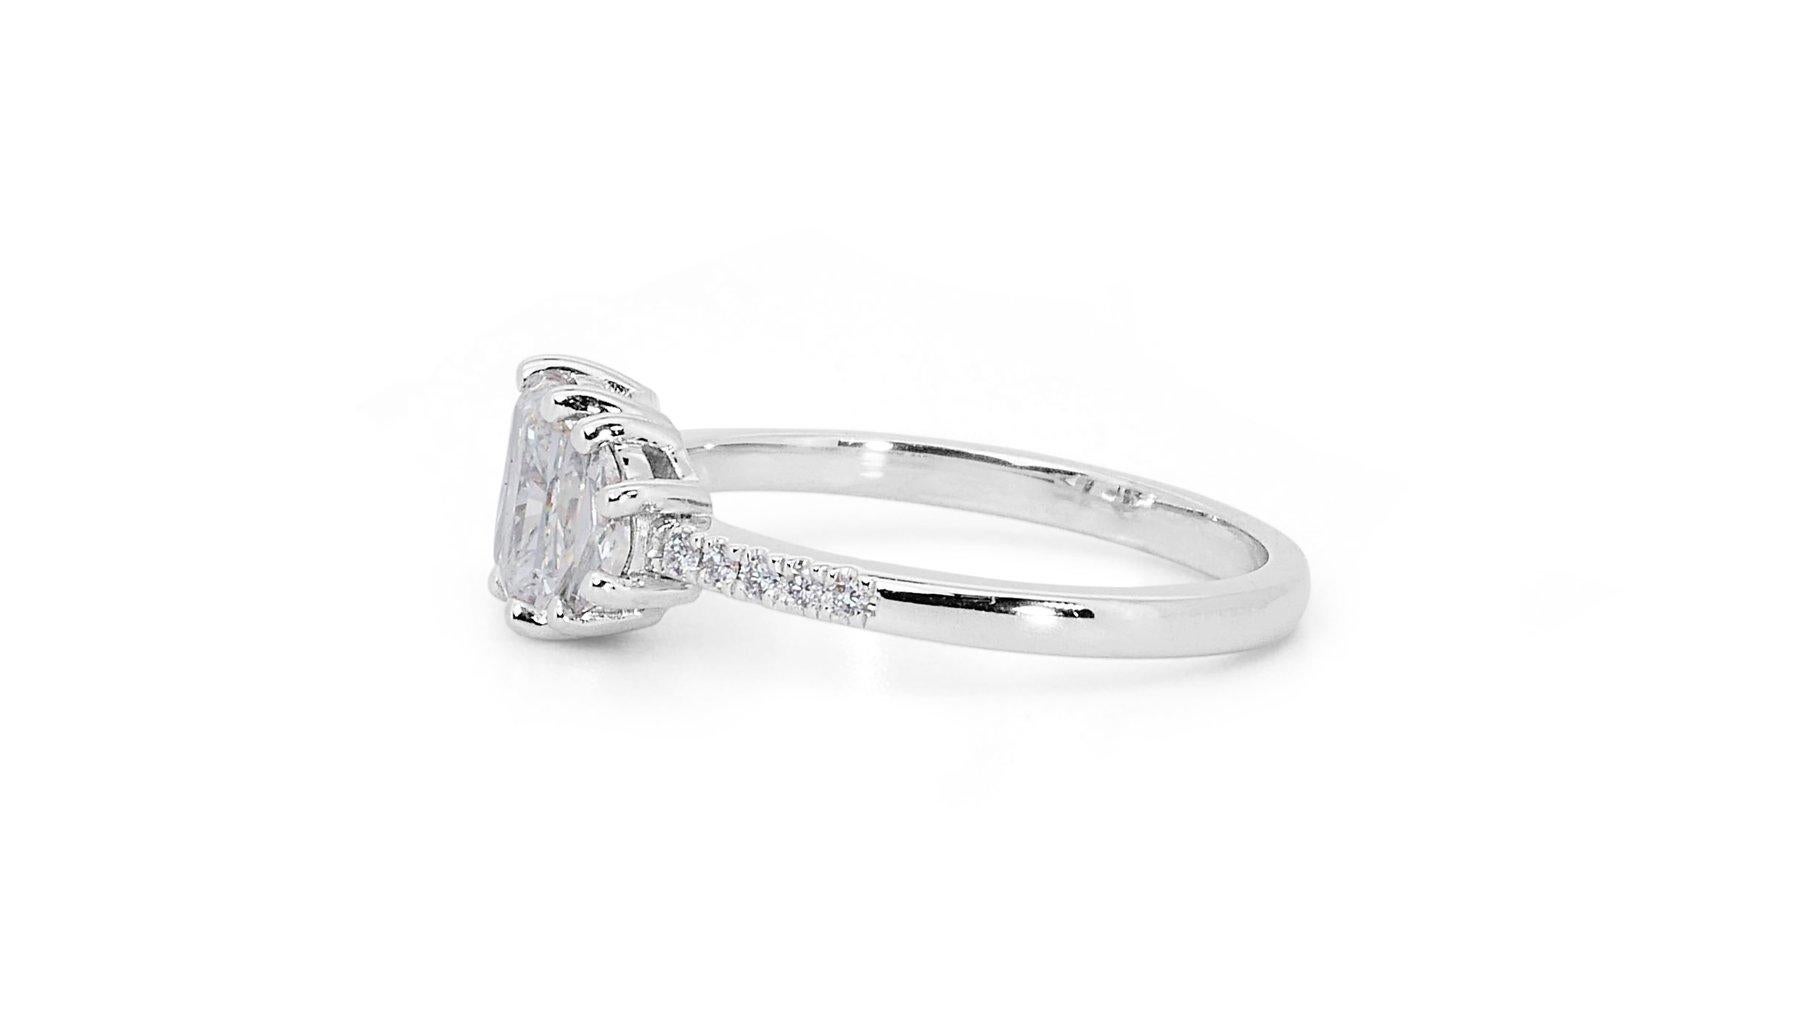 Radiant Cut Elegant 1.32ct Diamond Pave Ring in 18K White Gold - GIA Certified For Sale